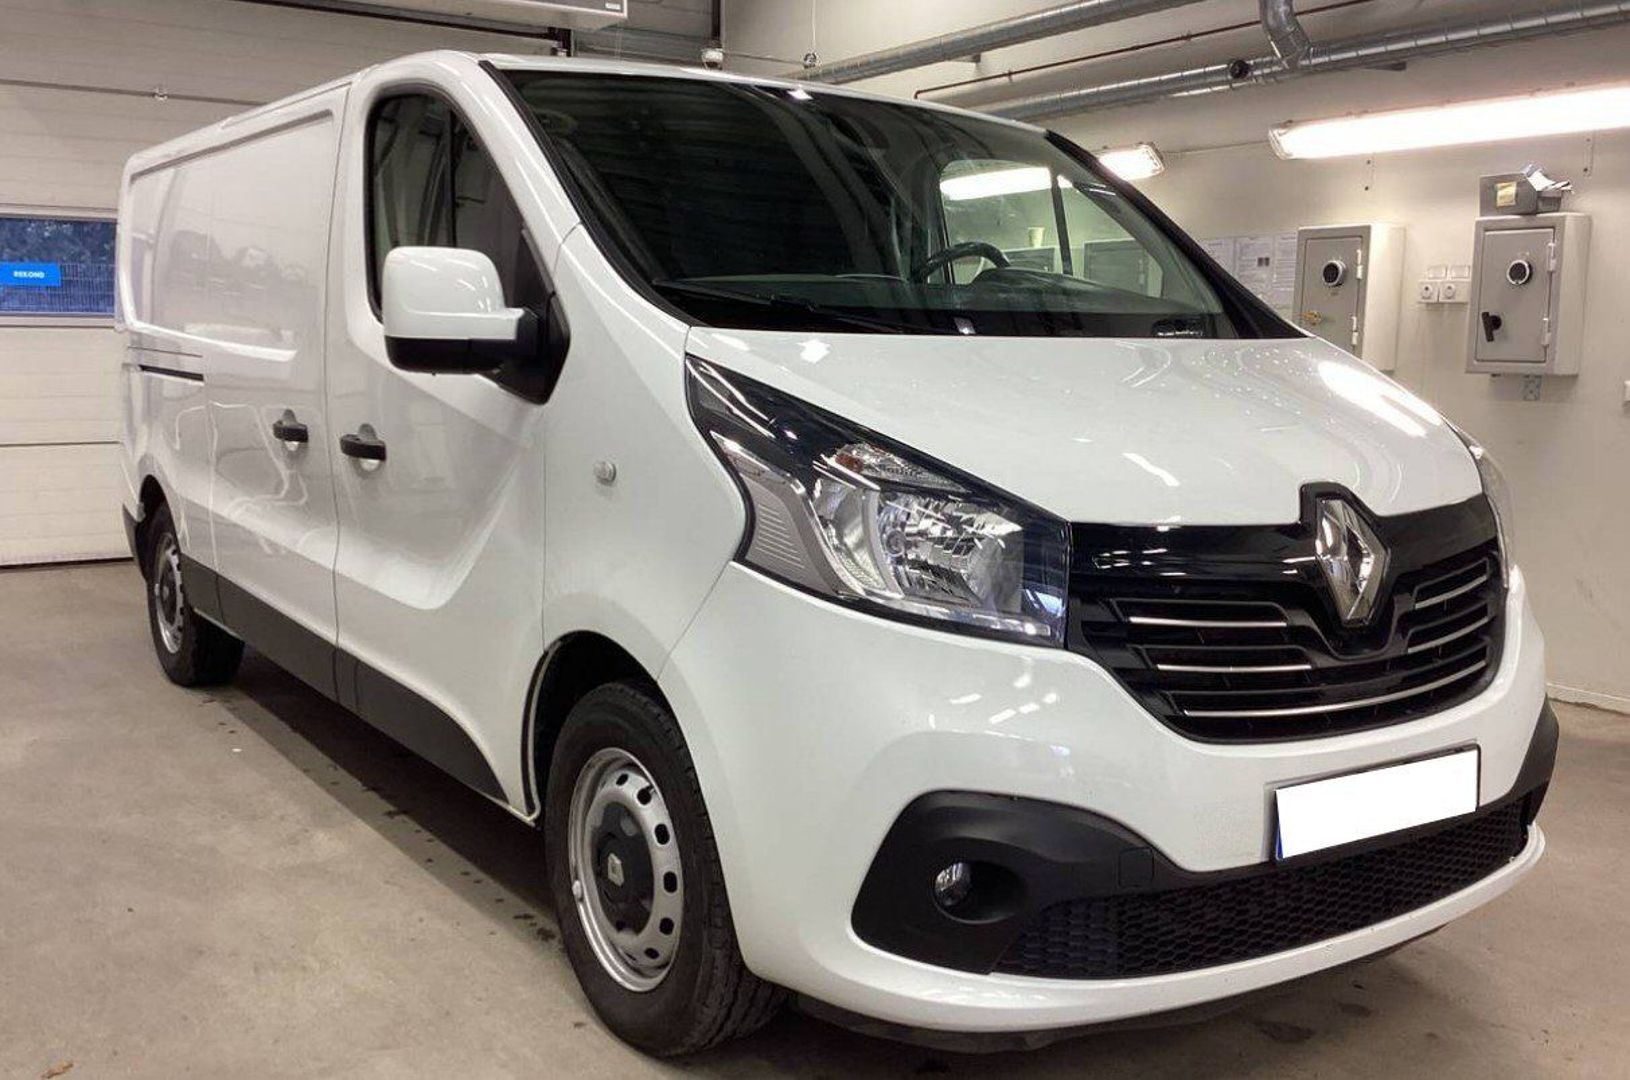 RENAULT TRAFIC FOURGON - L2H1 1200 1.6 DCI 145 GRAND CONFORT (2019)